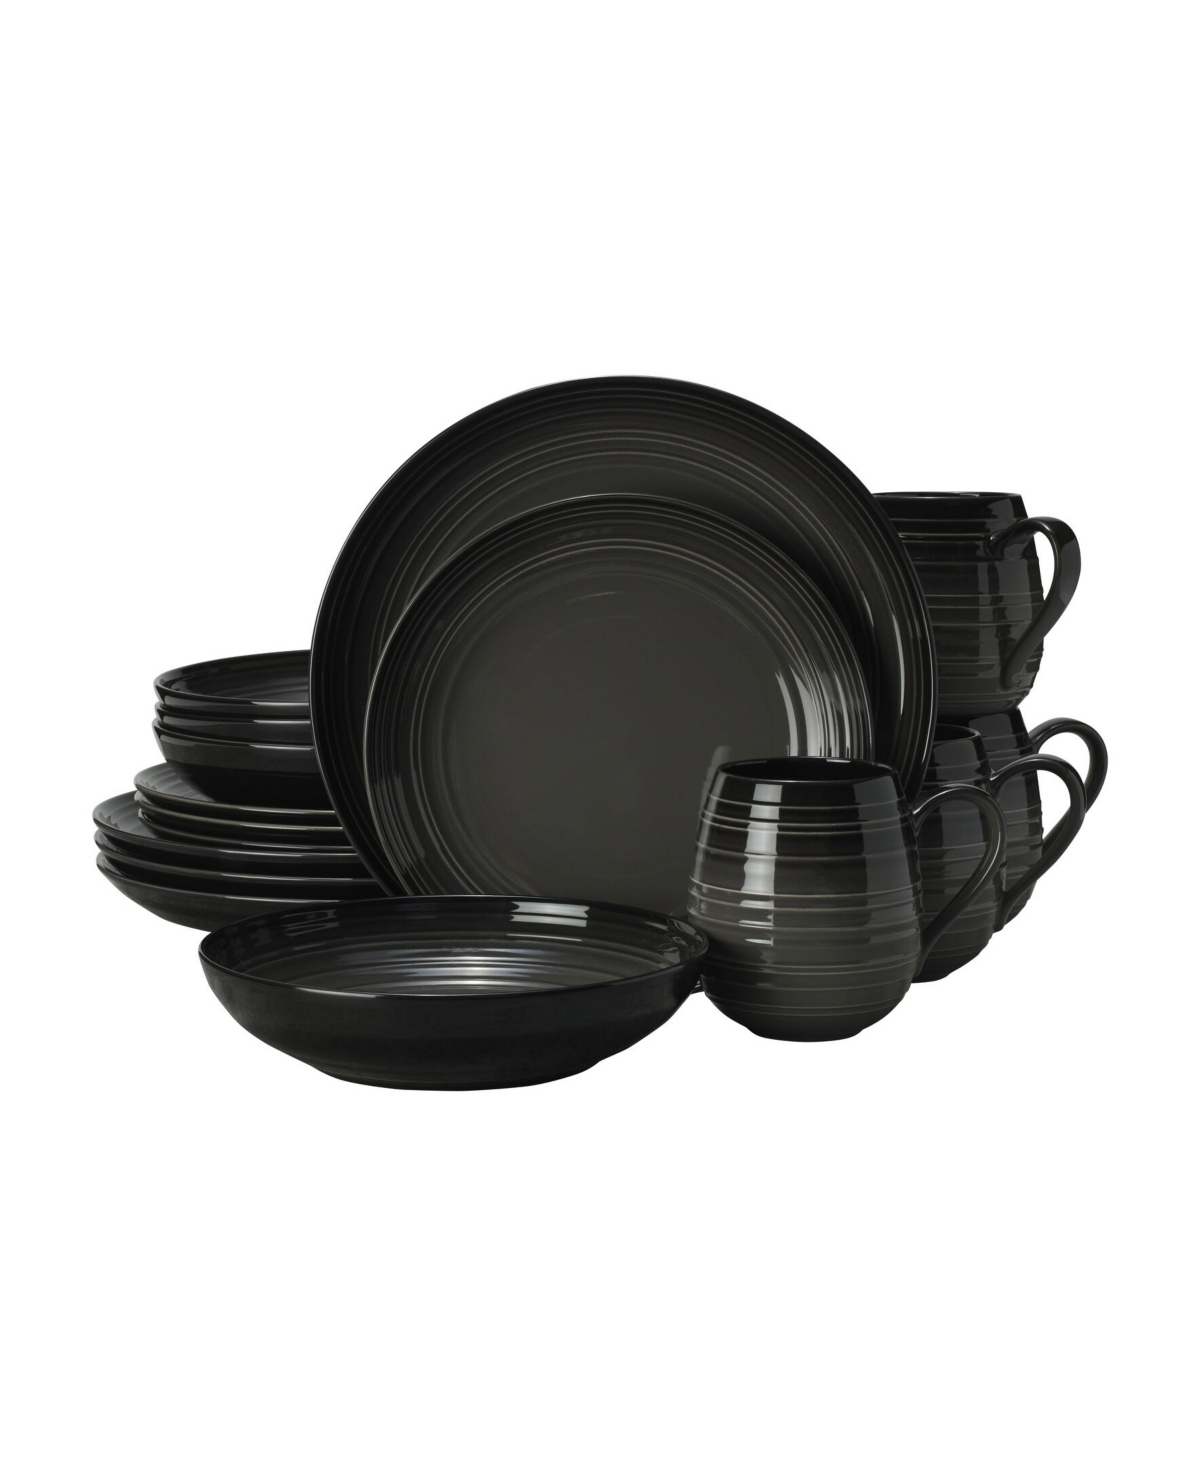 Swirl Coupe 16 Piece Dinnerware Set, Service for 4 - Gray